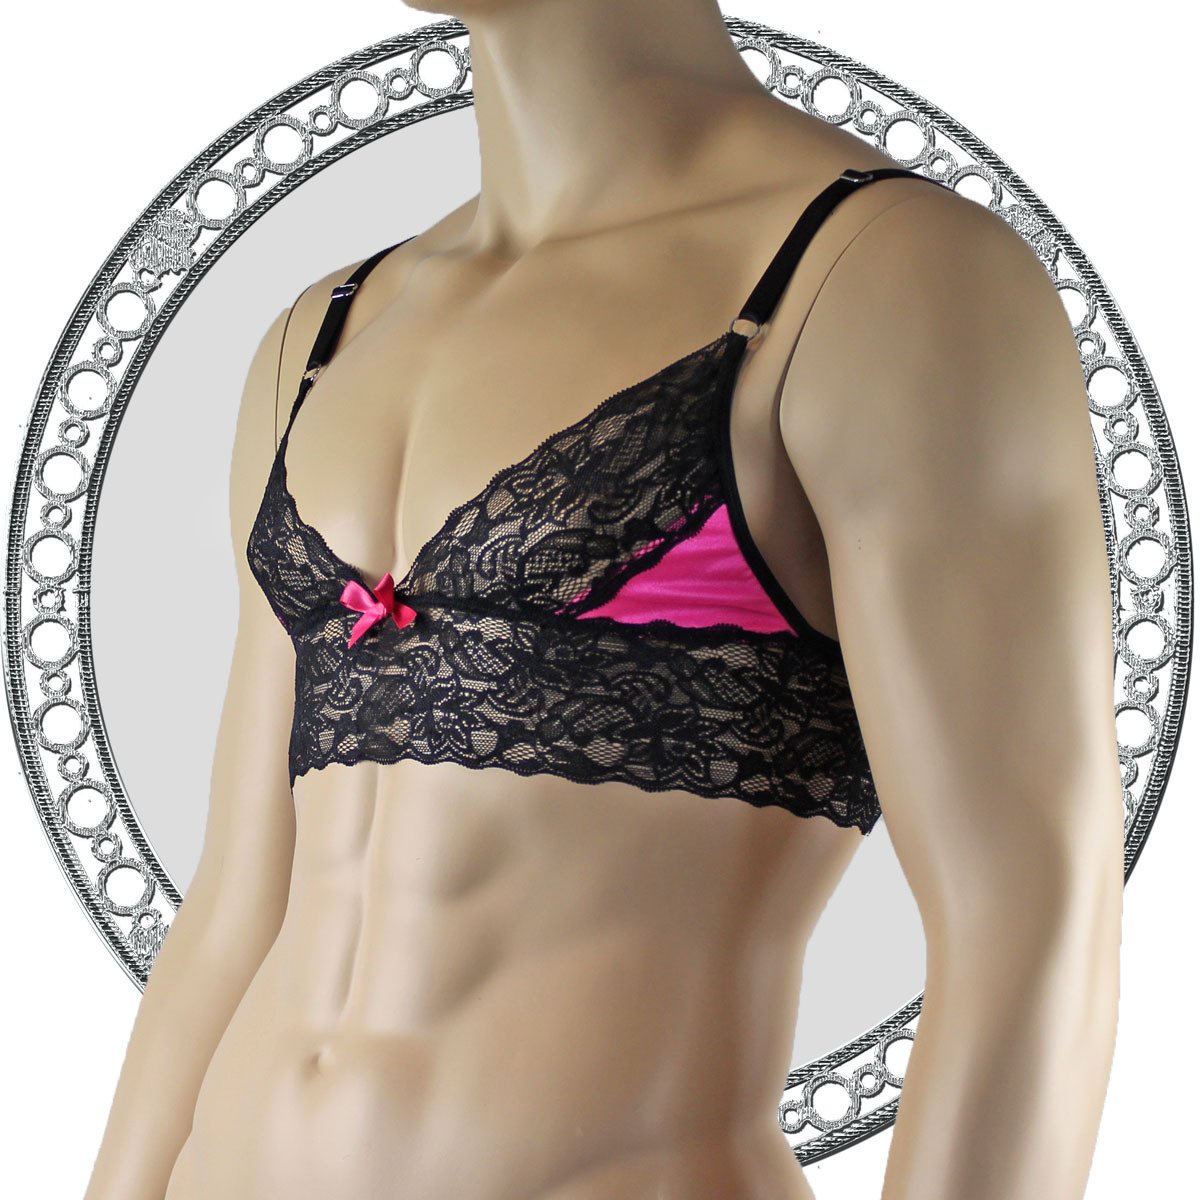 Mens Lace Bra Top Lingerie for Men Hot Pink and Black